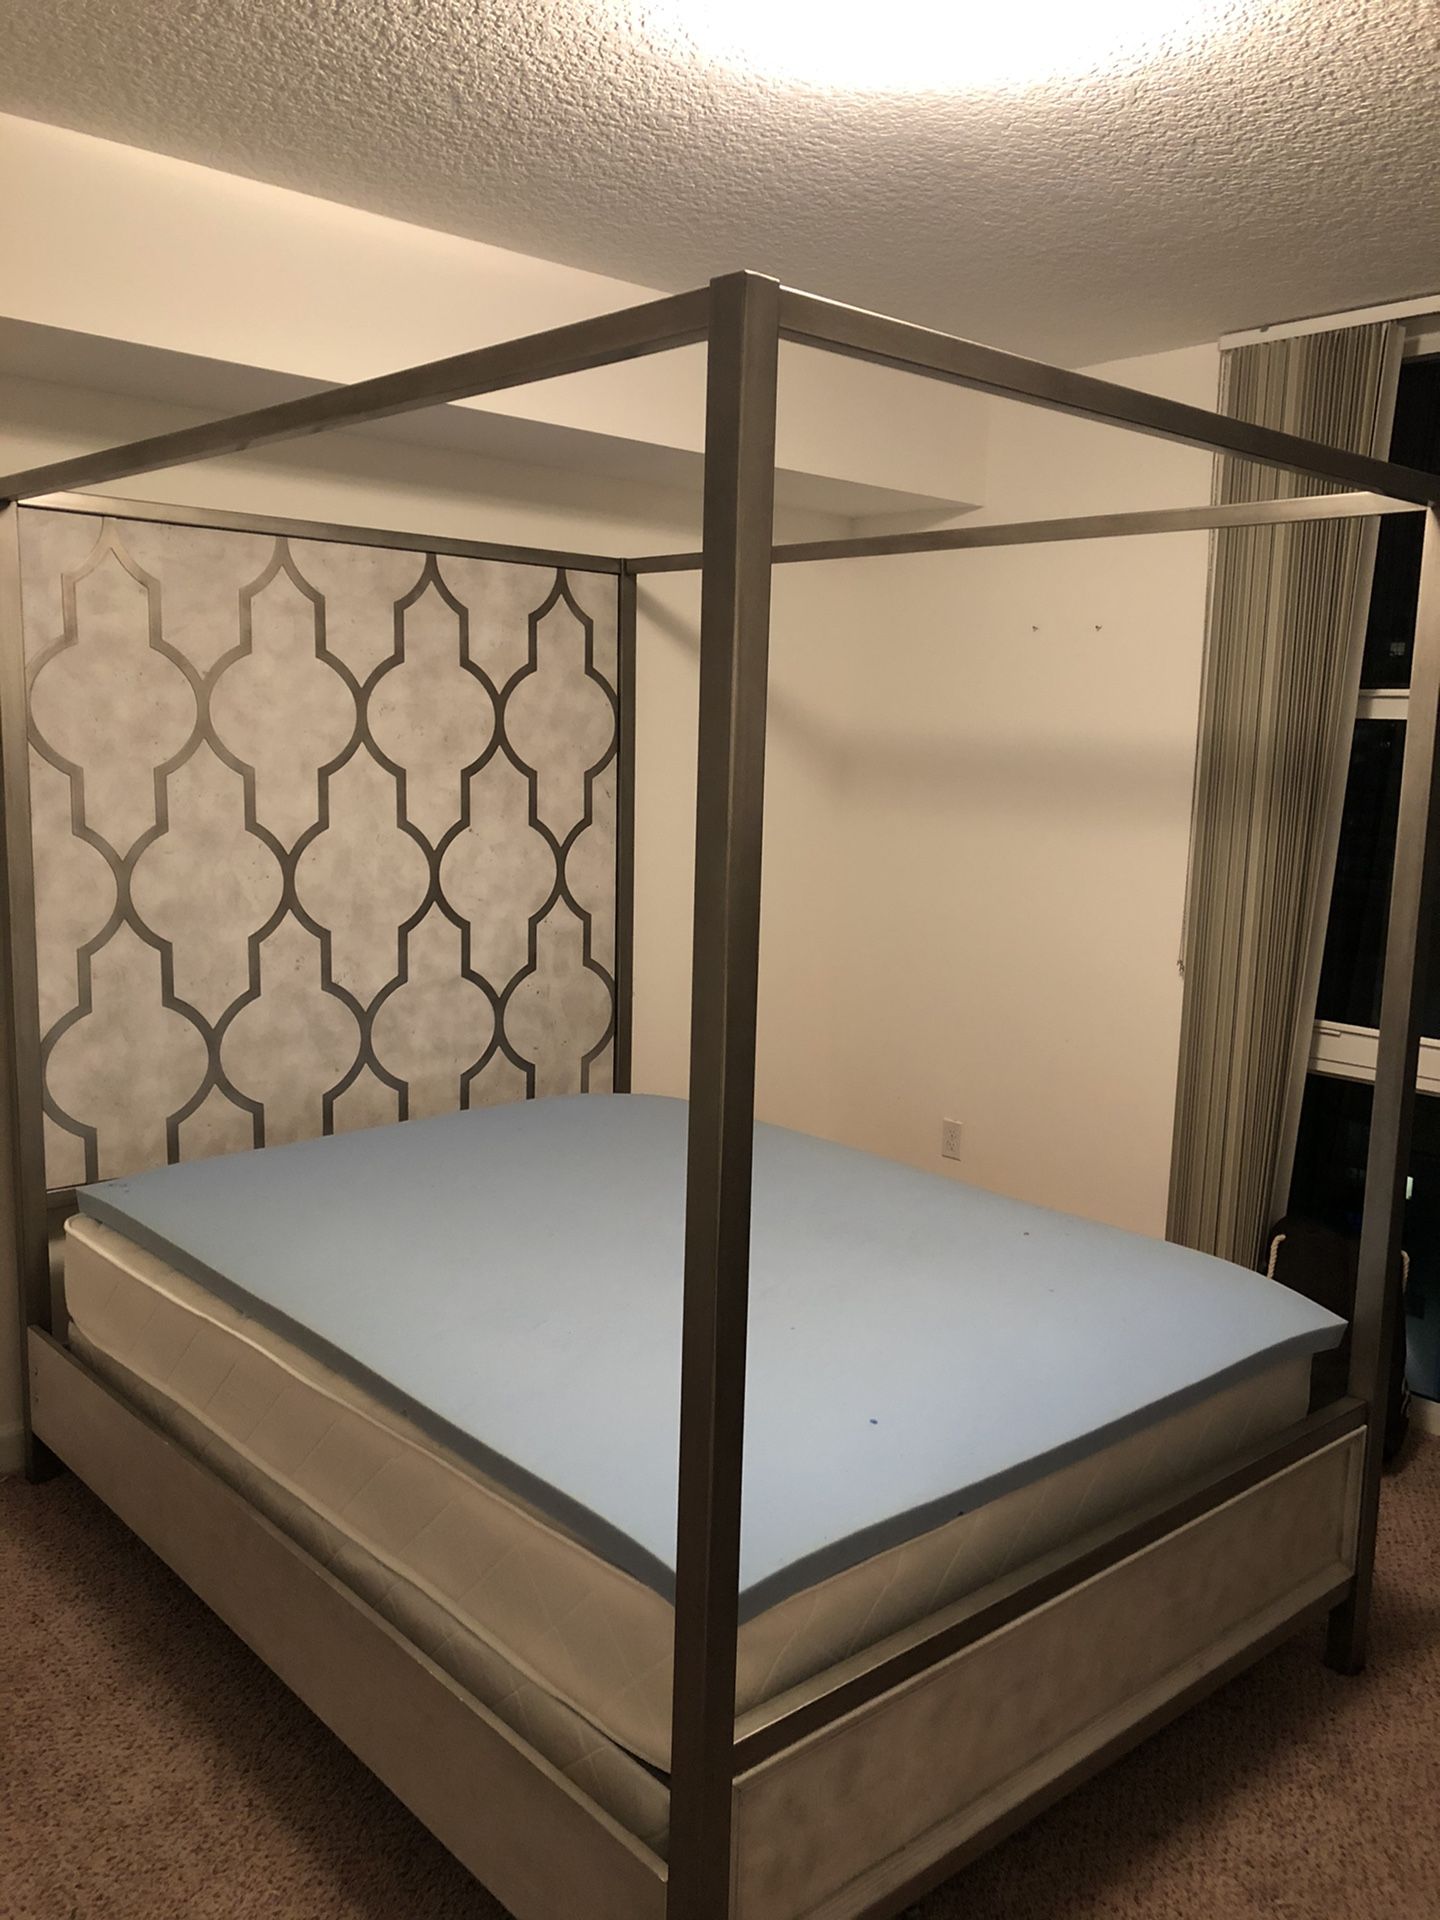 Queen Sized Canopy Bed Frame with Mattress and cover